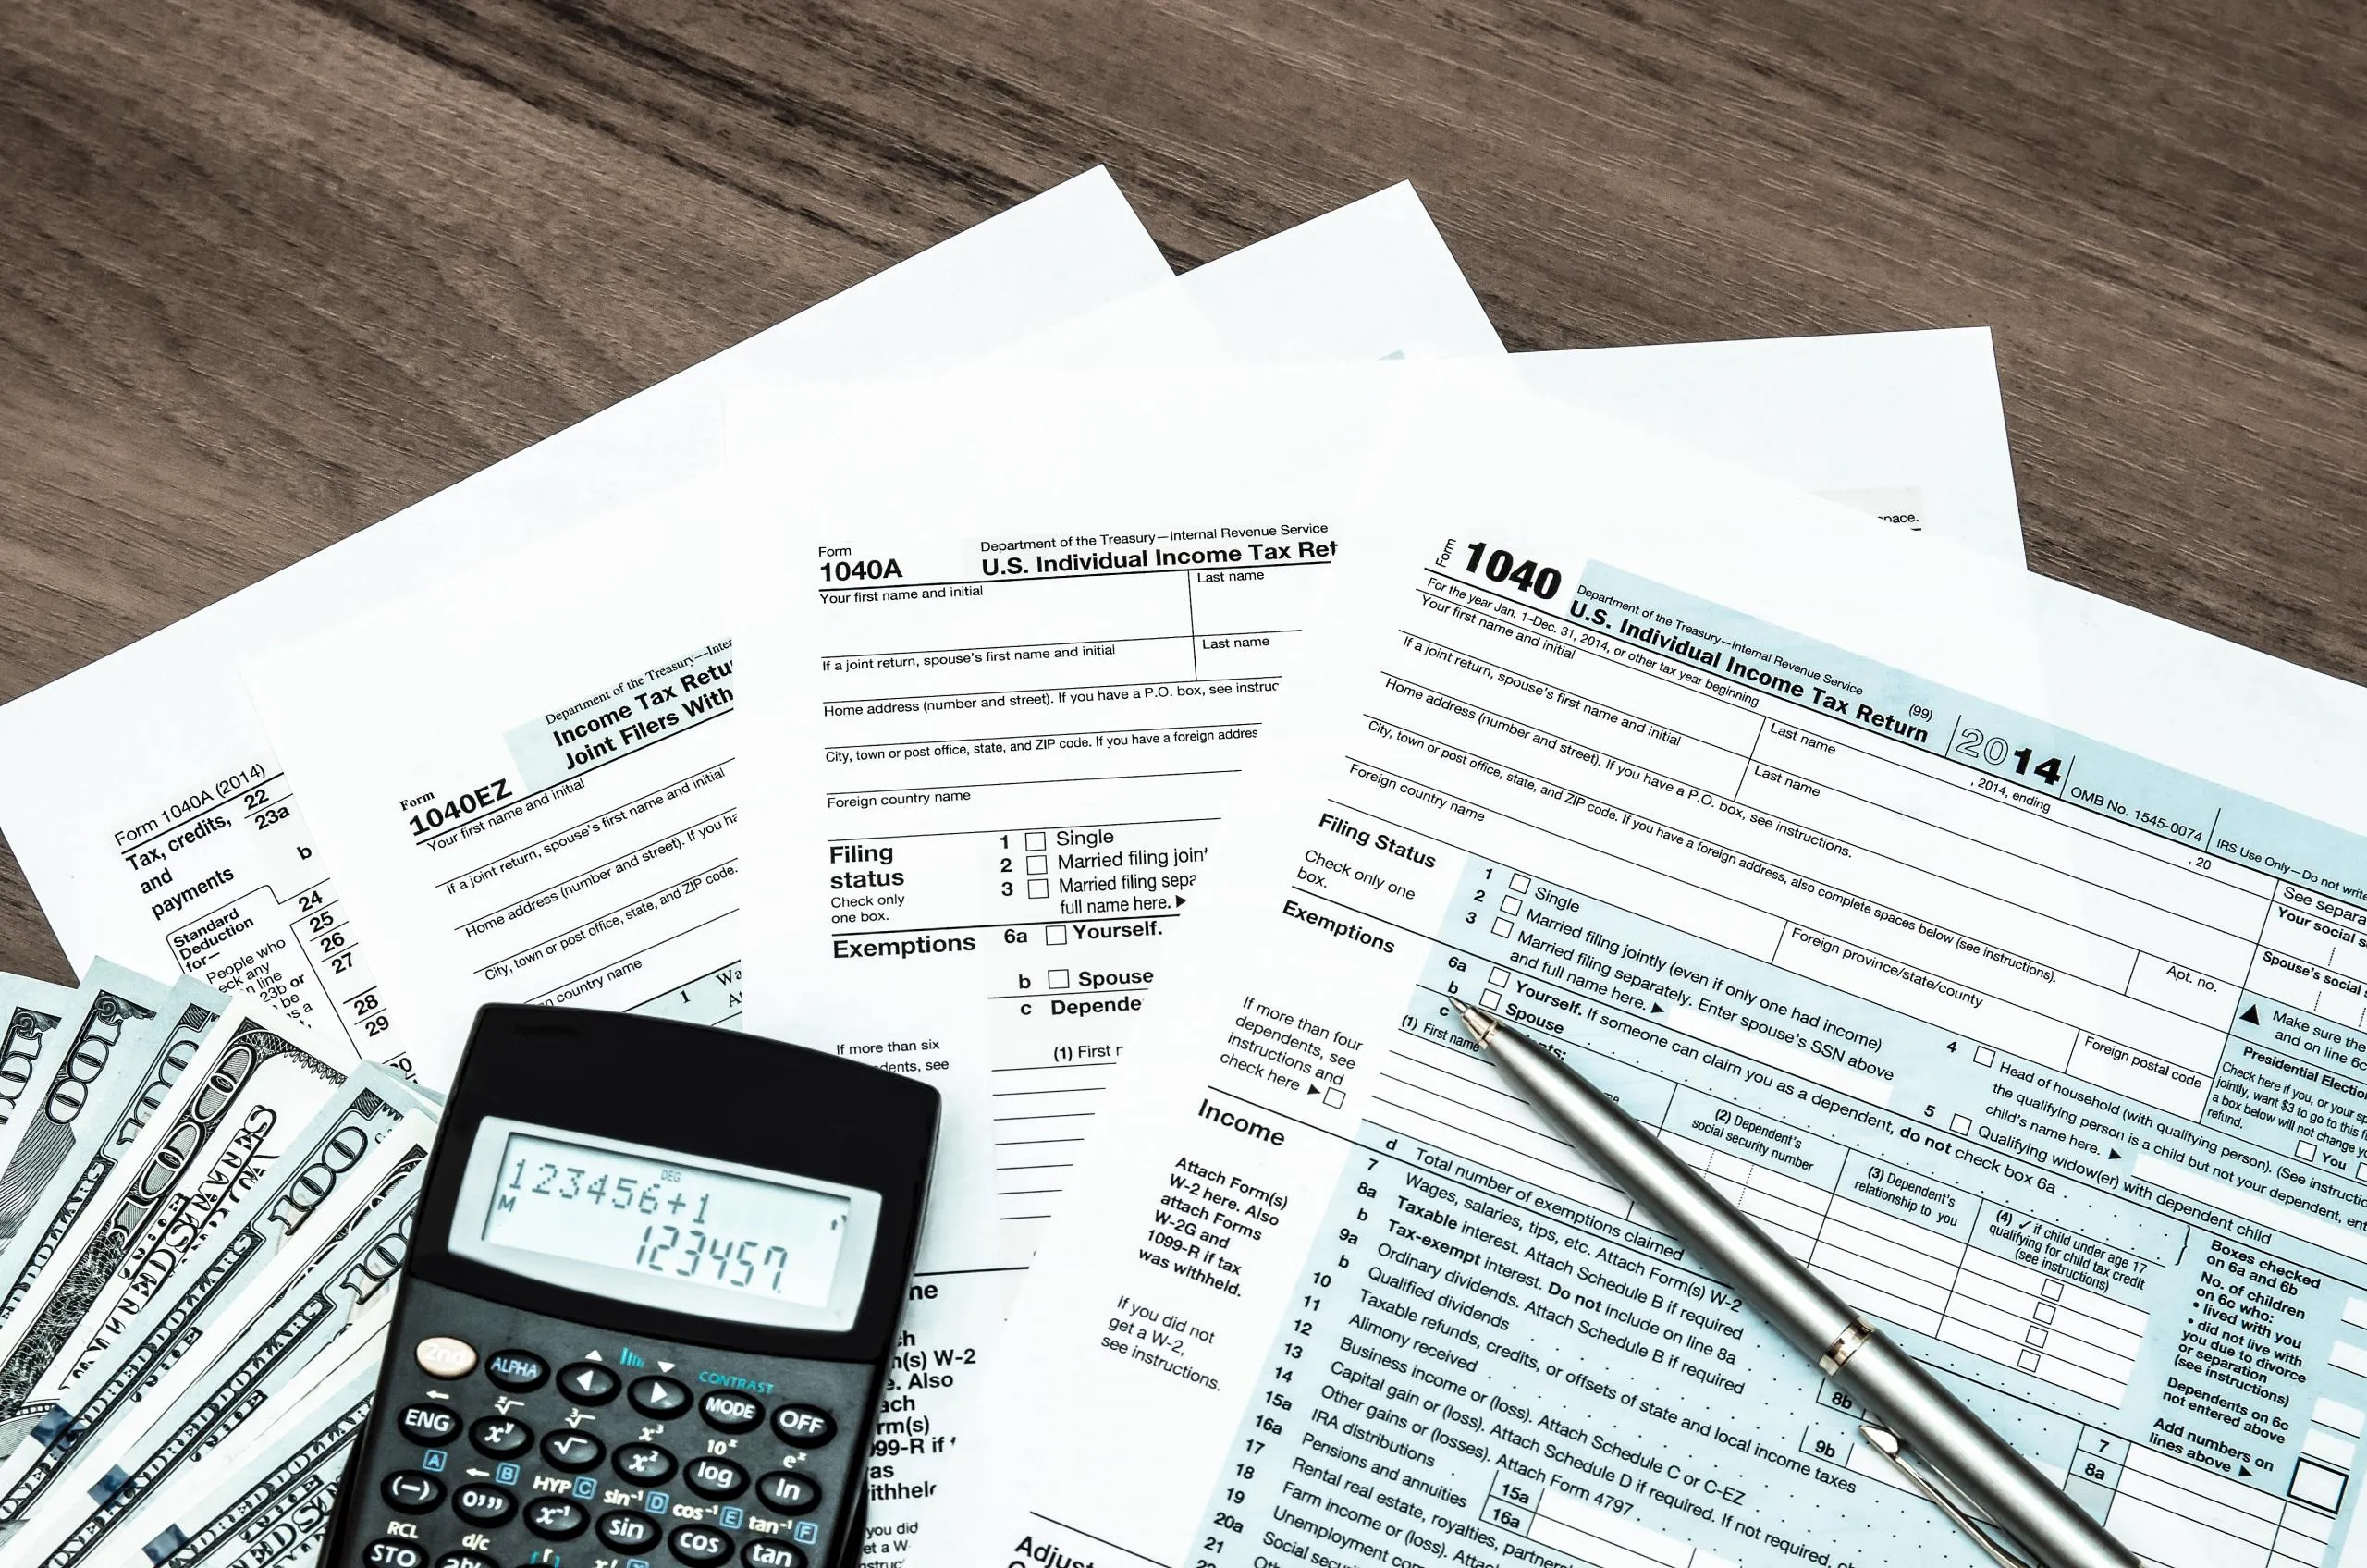 Avoid Making These Common Mistakes When Filing Your Taxes